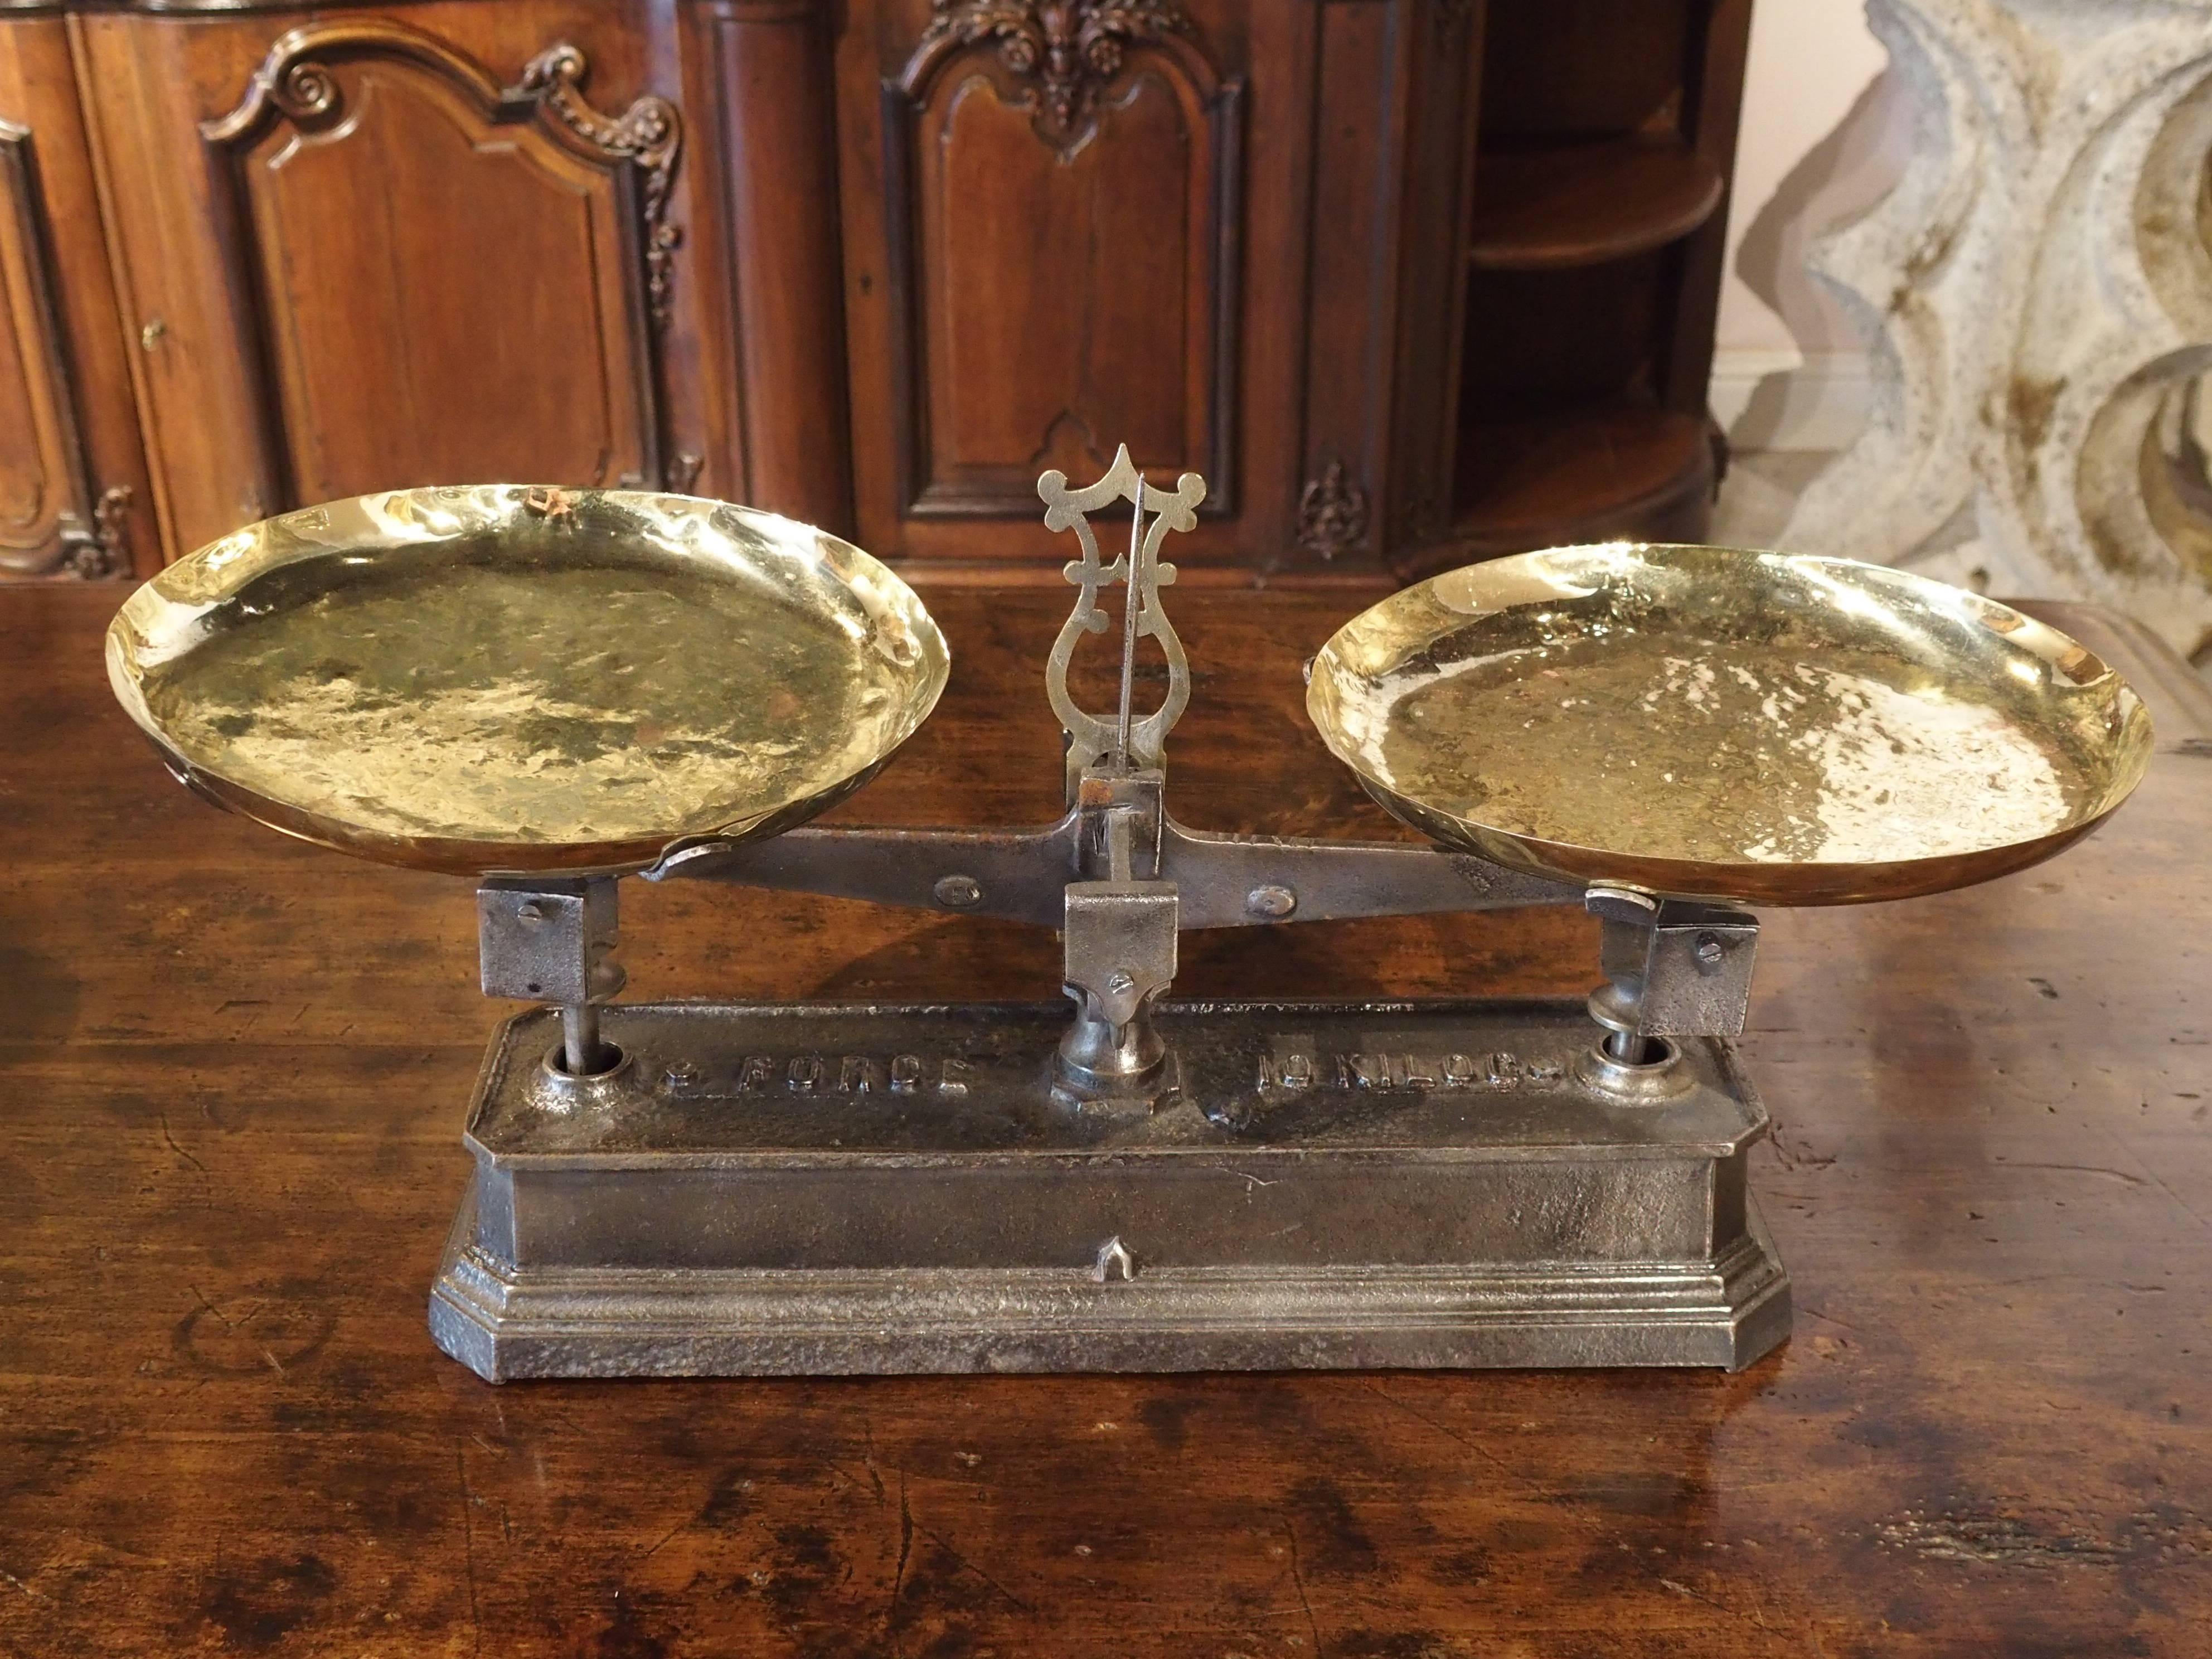 French scales of this type were used in stores for weighing produce. They consisted of a cast iron base with the weight mechanism at the top center. The arrow would have to be in the middle for the weight to be accurate. Two brass plates, one for